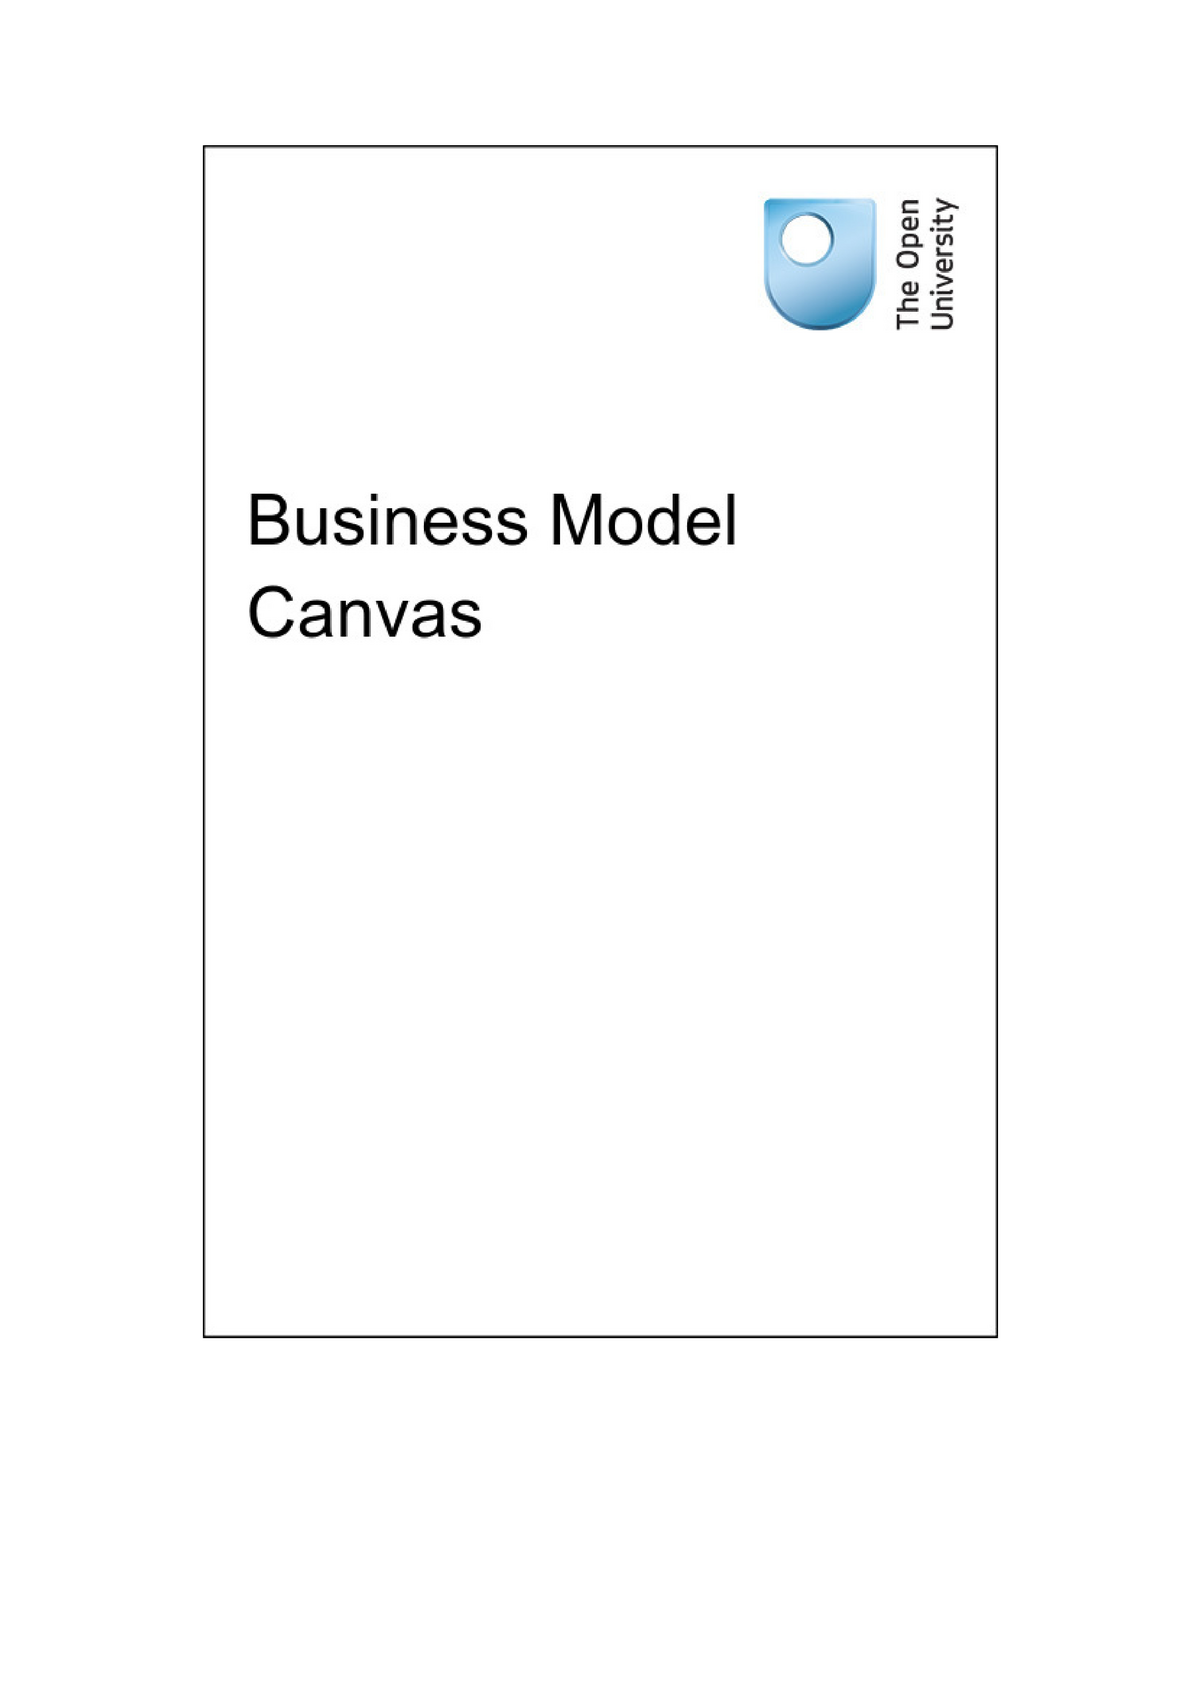 business-model-canvas-you-should-look-at-the-business-model-canvas